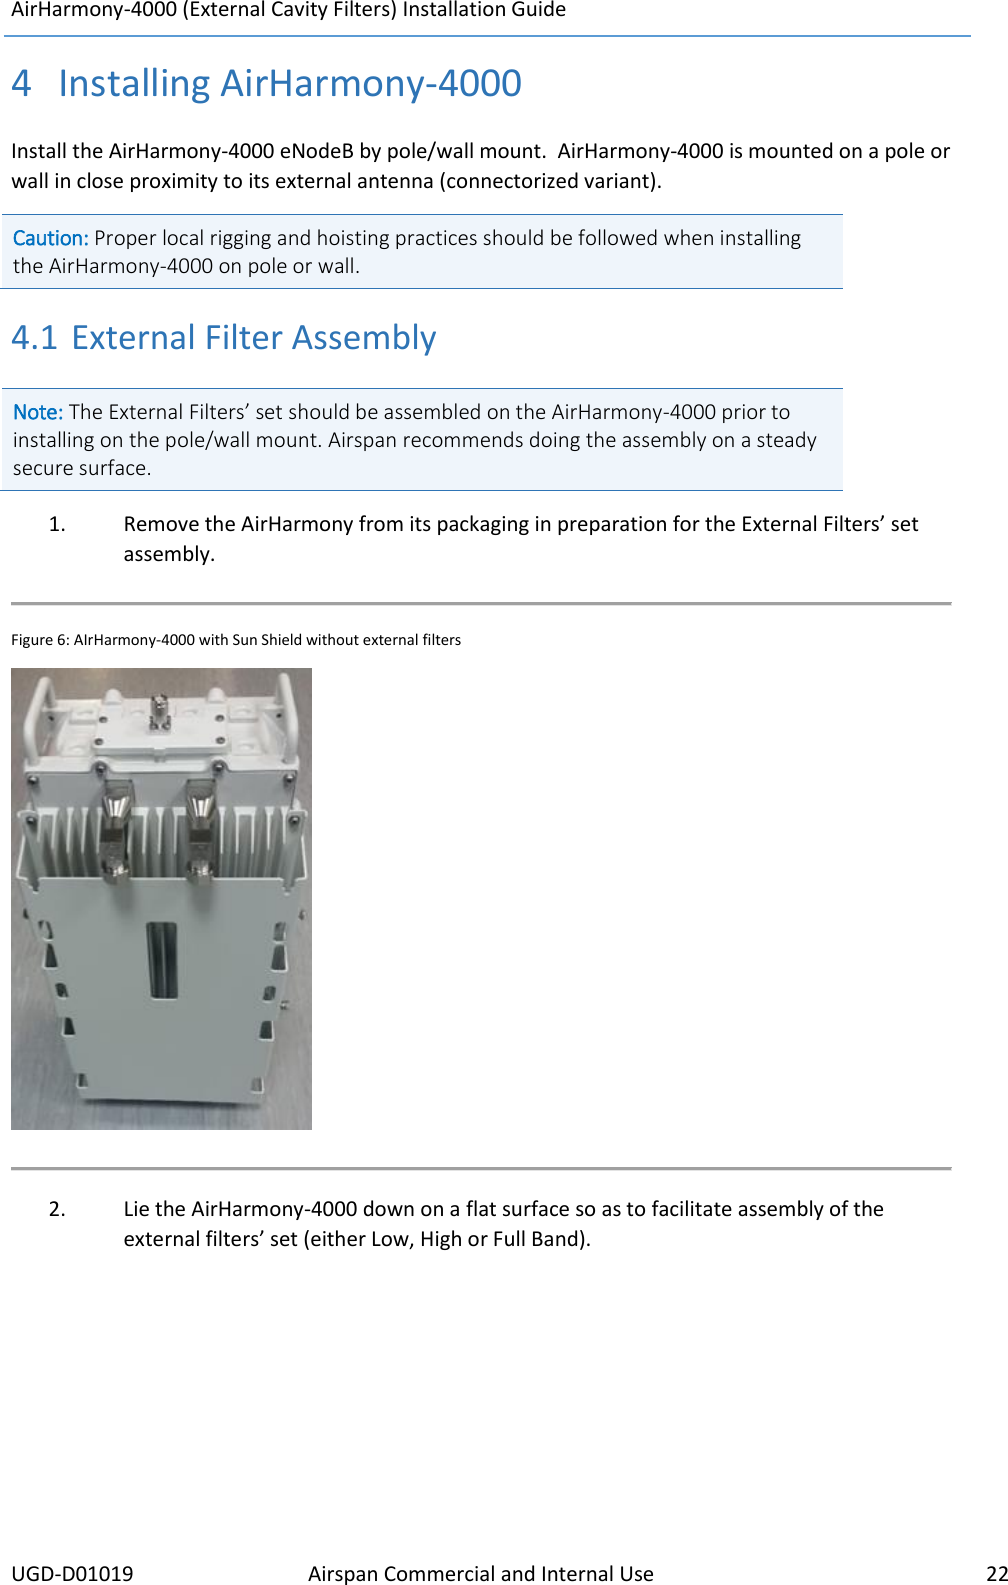 AirHarmony-4000 (External Cavity Filters) Installation Guide     UGD-D01019 Airspan Commercial and Internal Use    22  4 Installing AirHarmony-4000 Install the AirHarmony-4000 eNodeB by pole/wall mount.  AirHarmony-4000 is mounted on a pole or wall in close proximity to its external antenna (connectorized variant).  Caution: Proper local rigging and hoisting practices should be followed when installing the AirHarmony-4000 on pole or wall. 4.1 External Filter Assembly Note: The External Filters’ set should be assembled on the AirHarmony-4000 prior to installing on the pole/wall mount. Airspan recommends doing the assembly on a steady secure surface.   1. Remove the AirHarmony from its packaging in preparation for the External Filters’ set assembly.  Figure 6: AIrHarmony-4000 with Sun Shield without external filters   2. Lie the AirHarmony-4000 down on a flat surface so as to facilitate assembly of the external filters’ set (either Low, High or Full Band).    